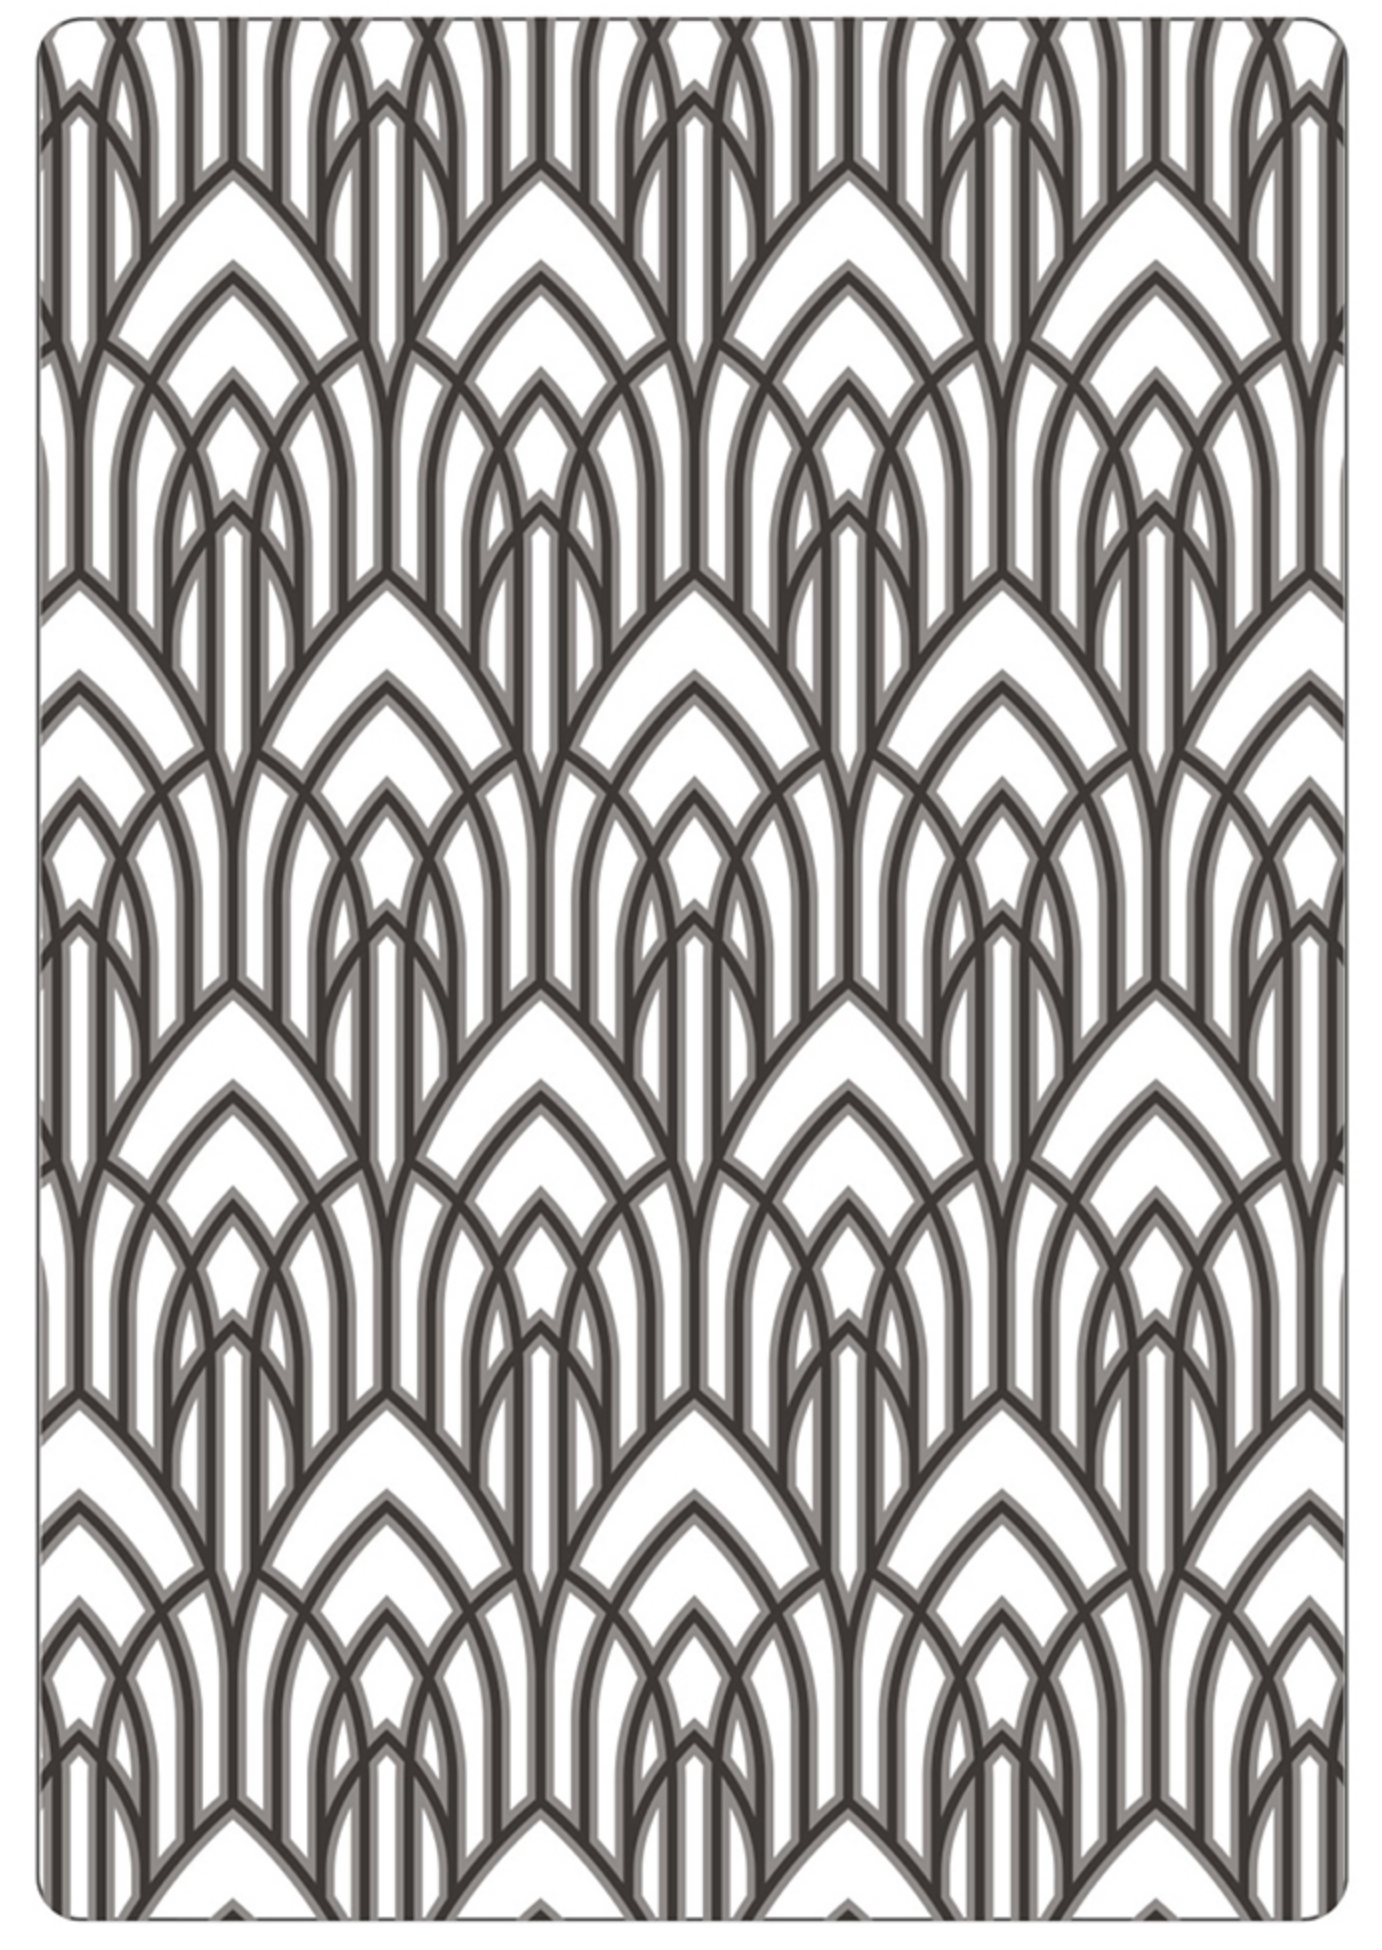 Sizzix - Tim Holtz - Texture Fades - Embossing Folder A6 - Arched